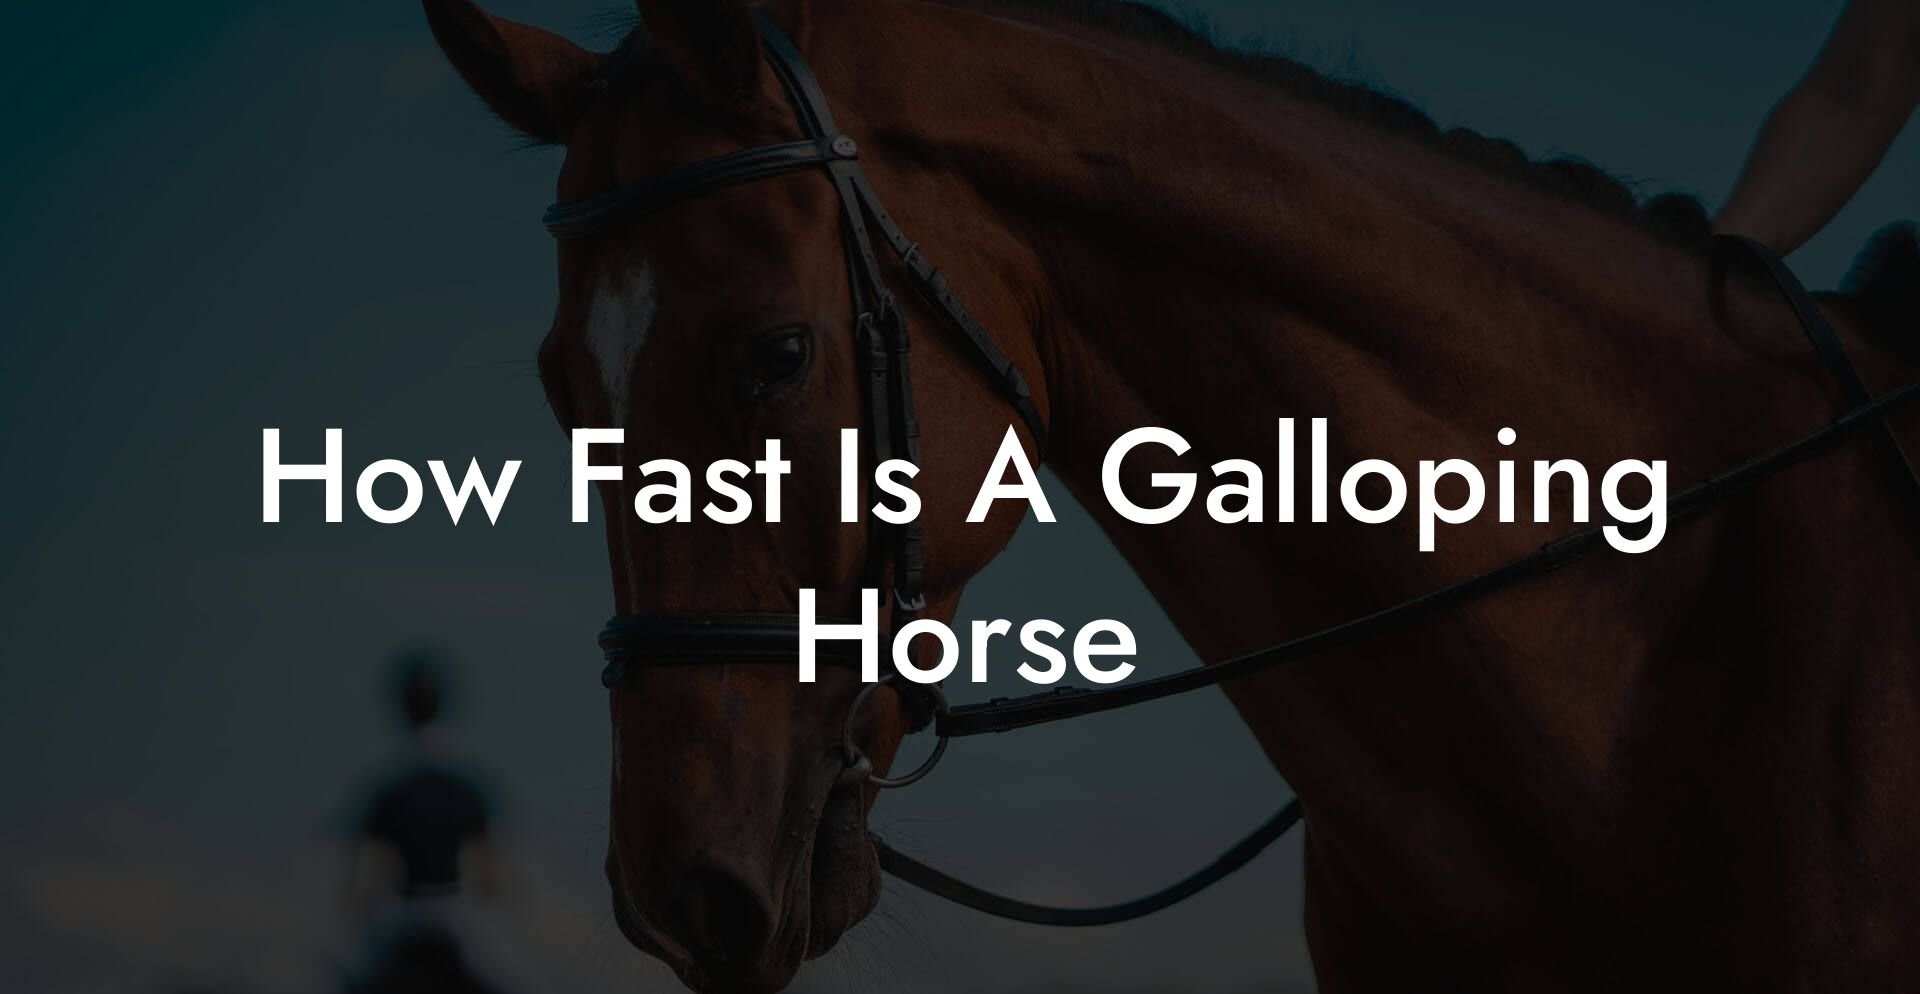 How Fast Is A Galloping Horse